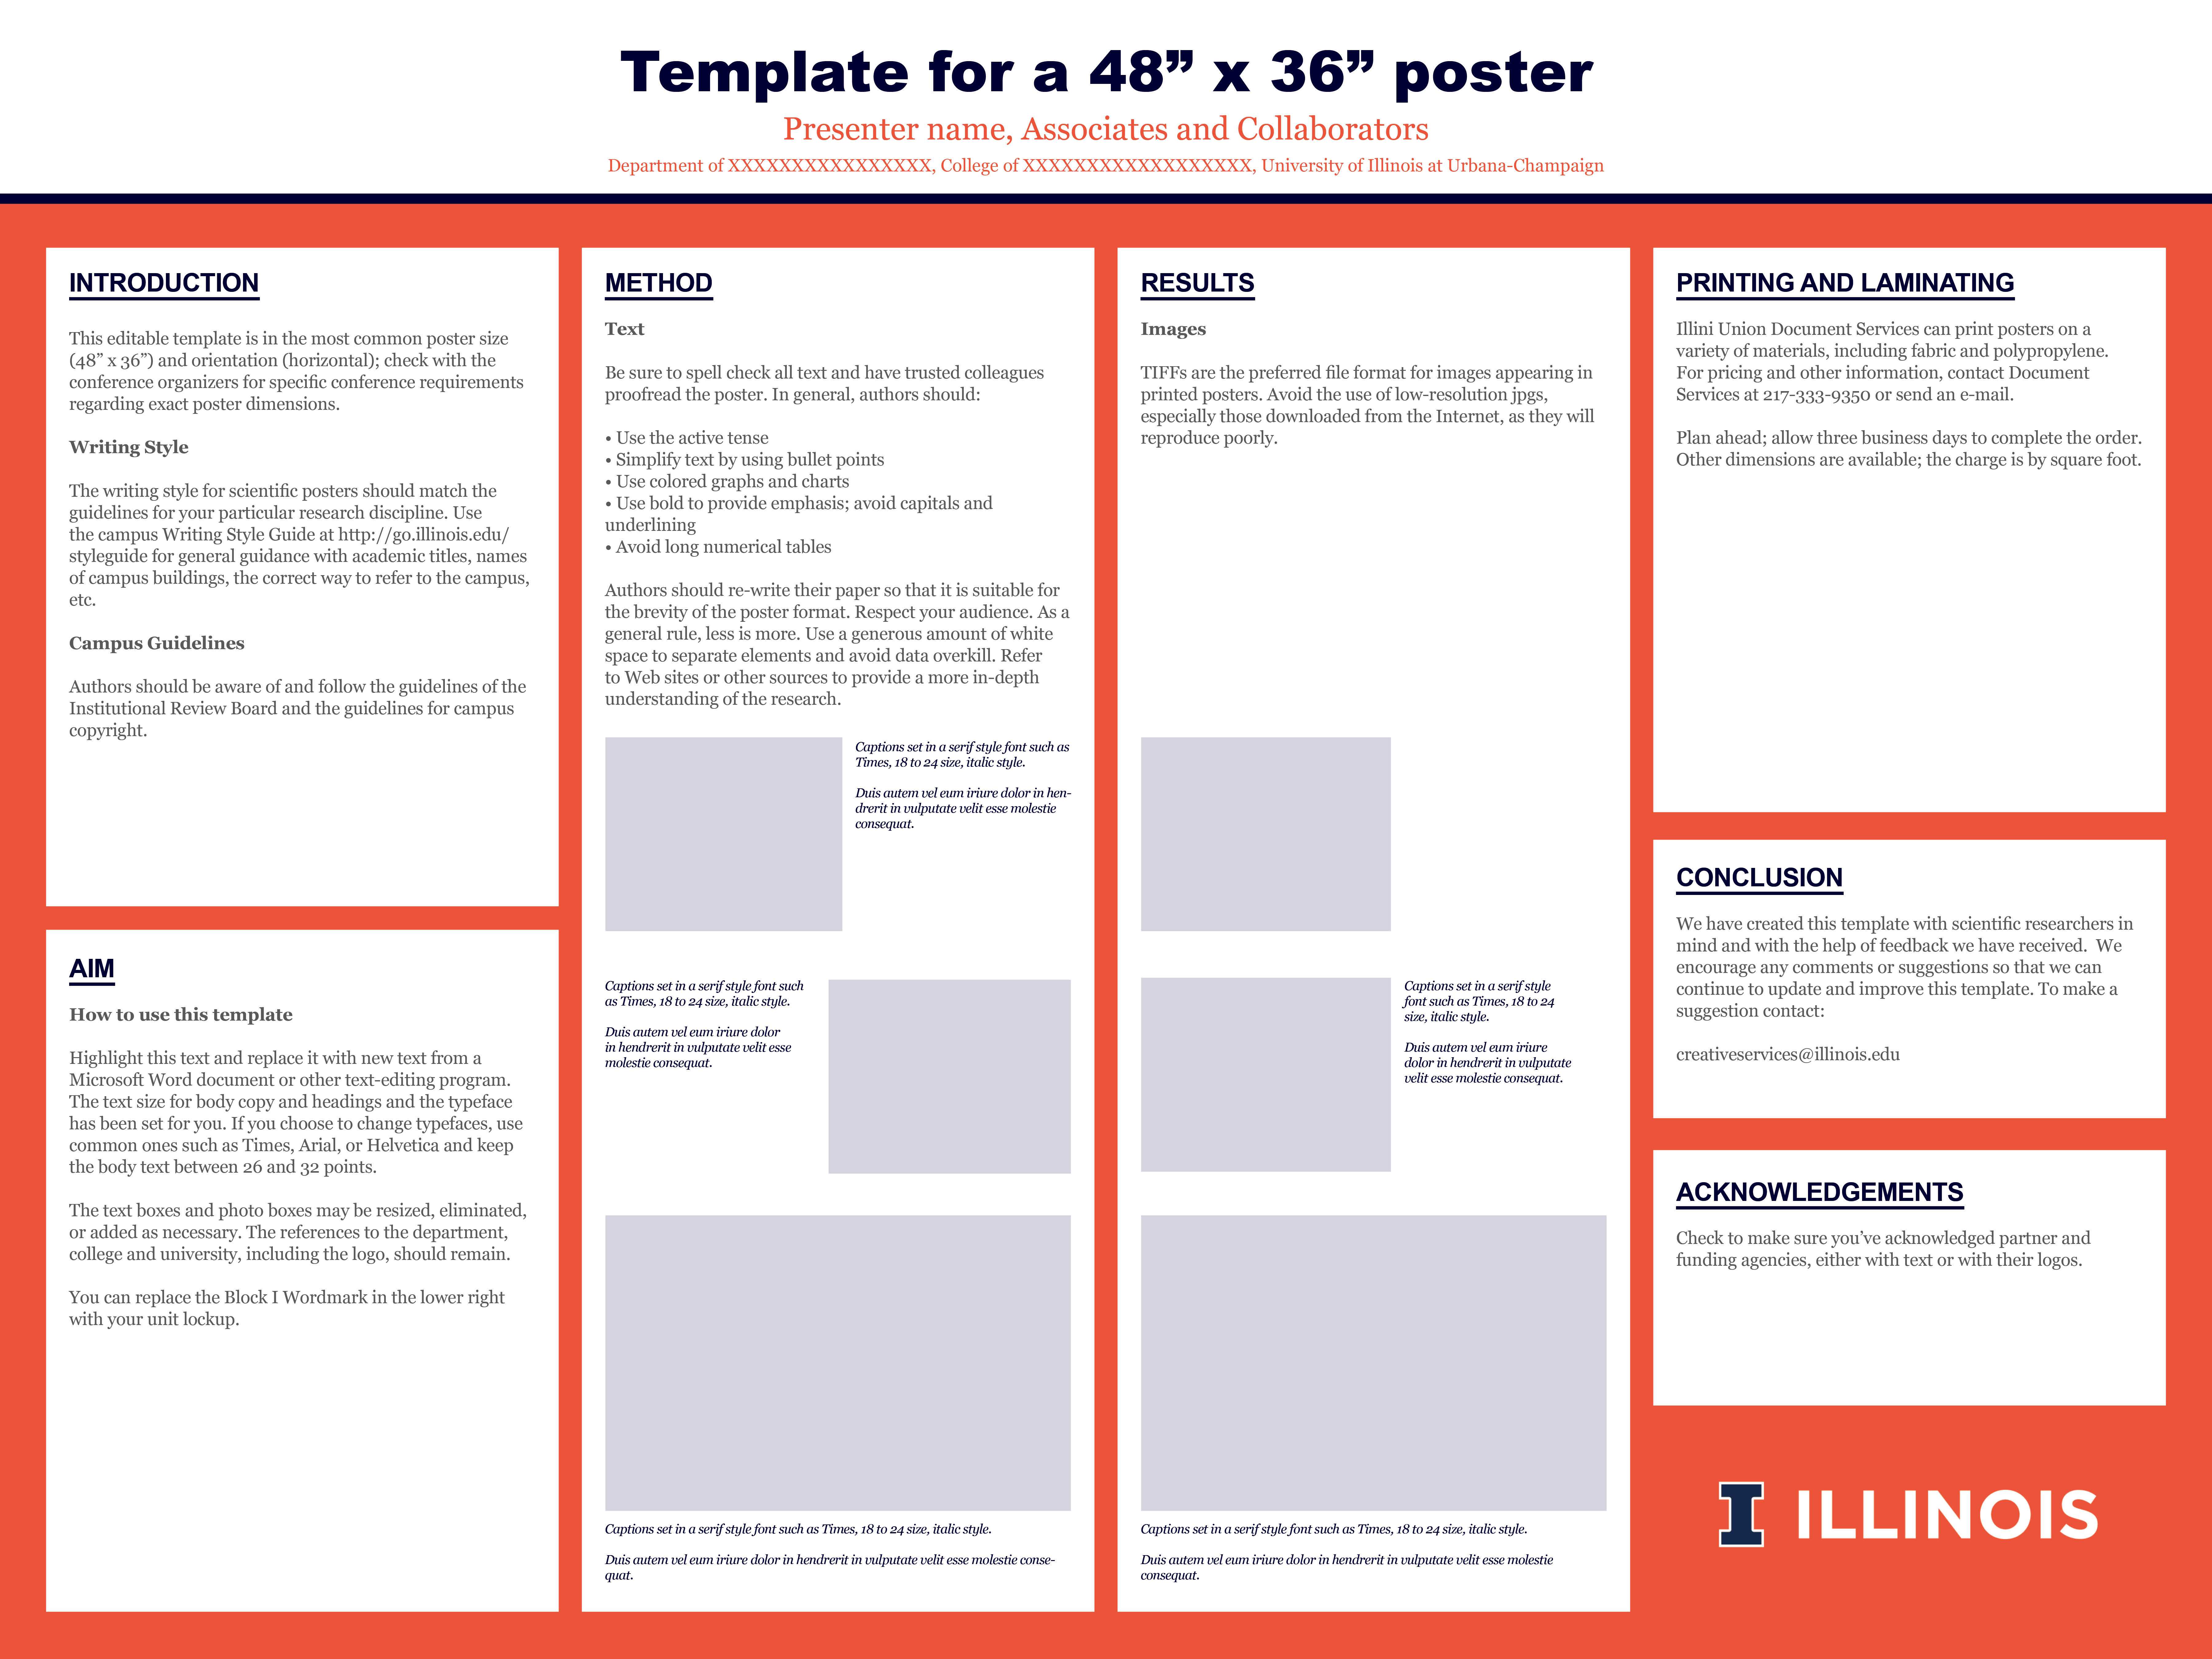 Research Poster | Campus Templates | Public Affairs | Illinois For Powerpoint Academic Poster Template